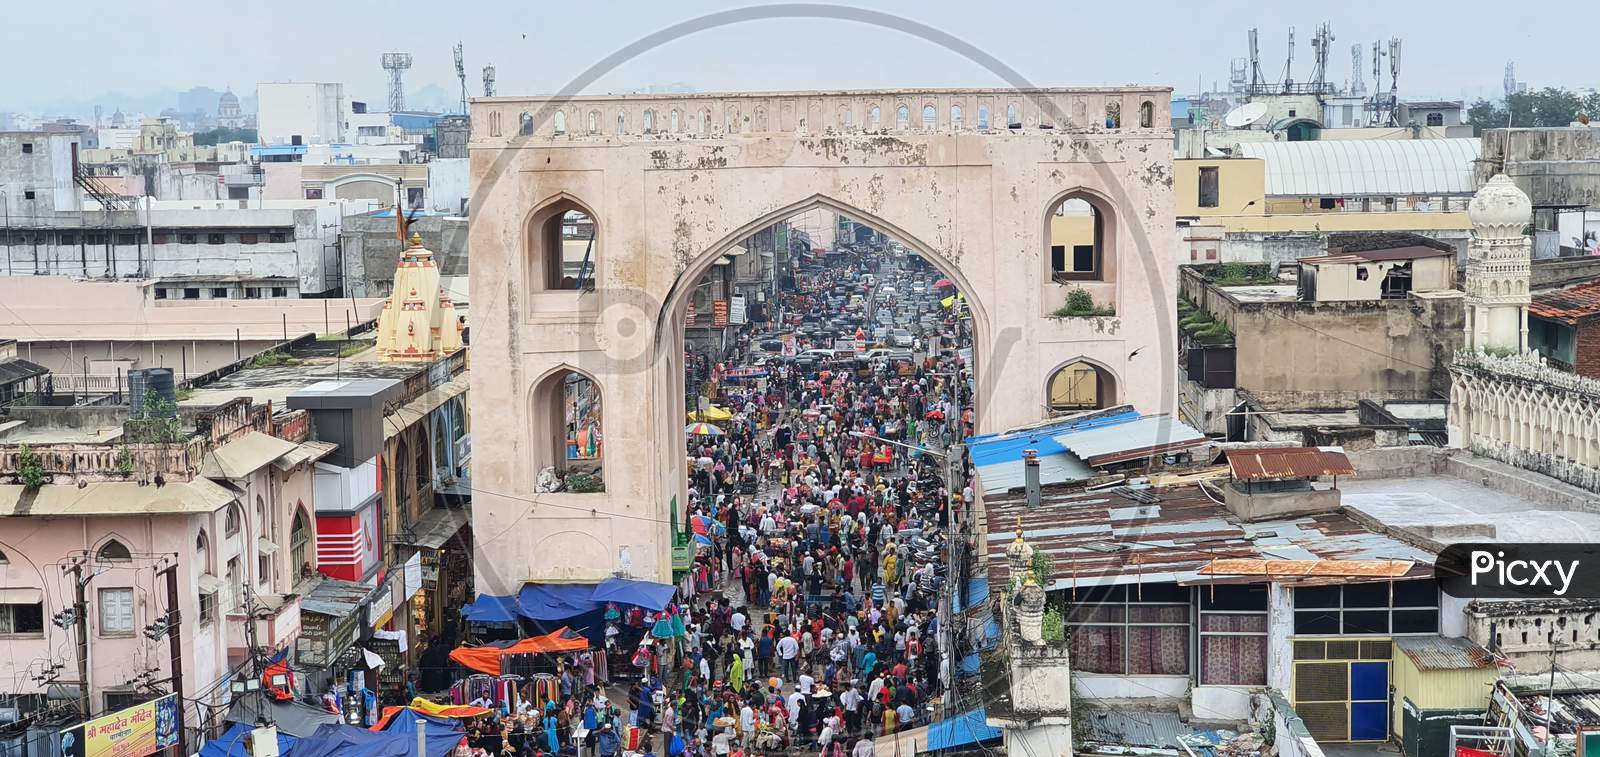 Busy market view from the Charminar in Hyderabad